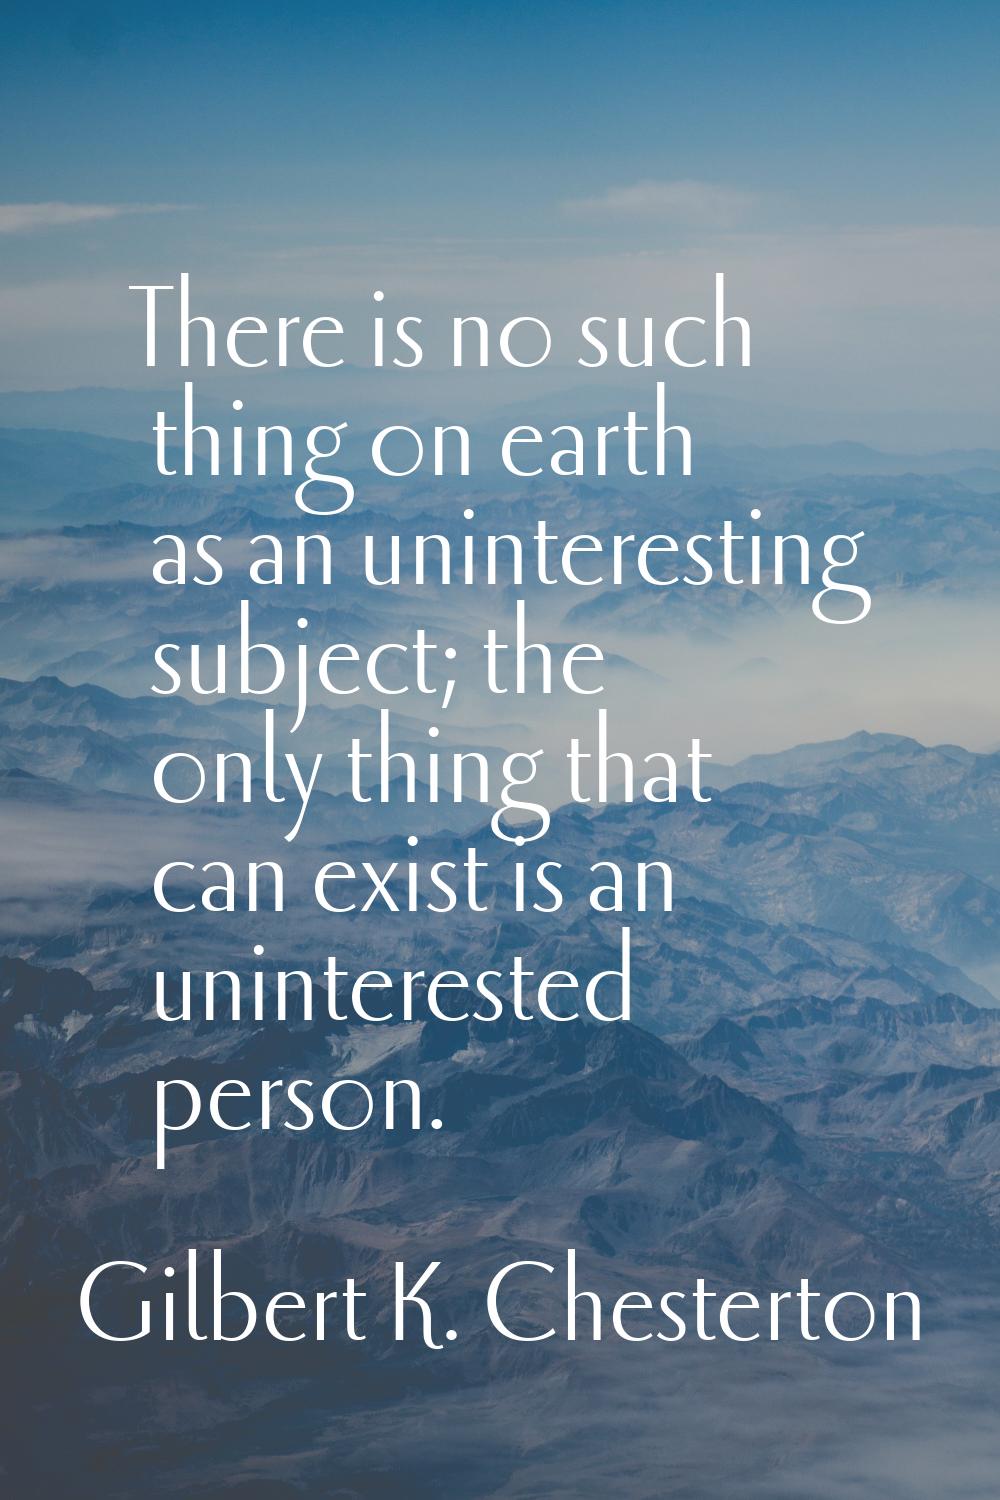 There is no such thing on earth as an uninteresting subject; the only thing that can exist is an un